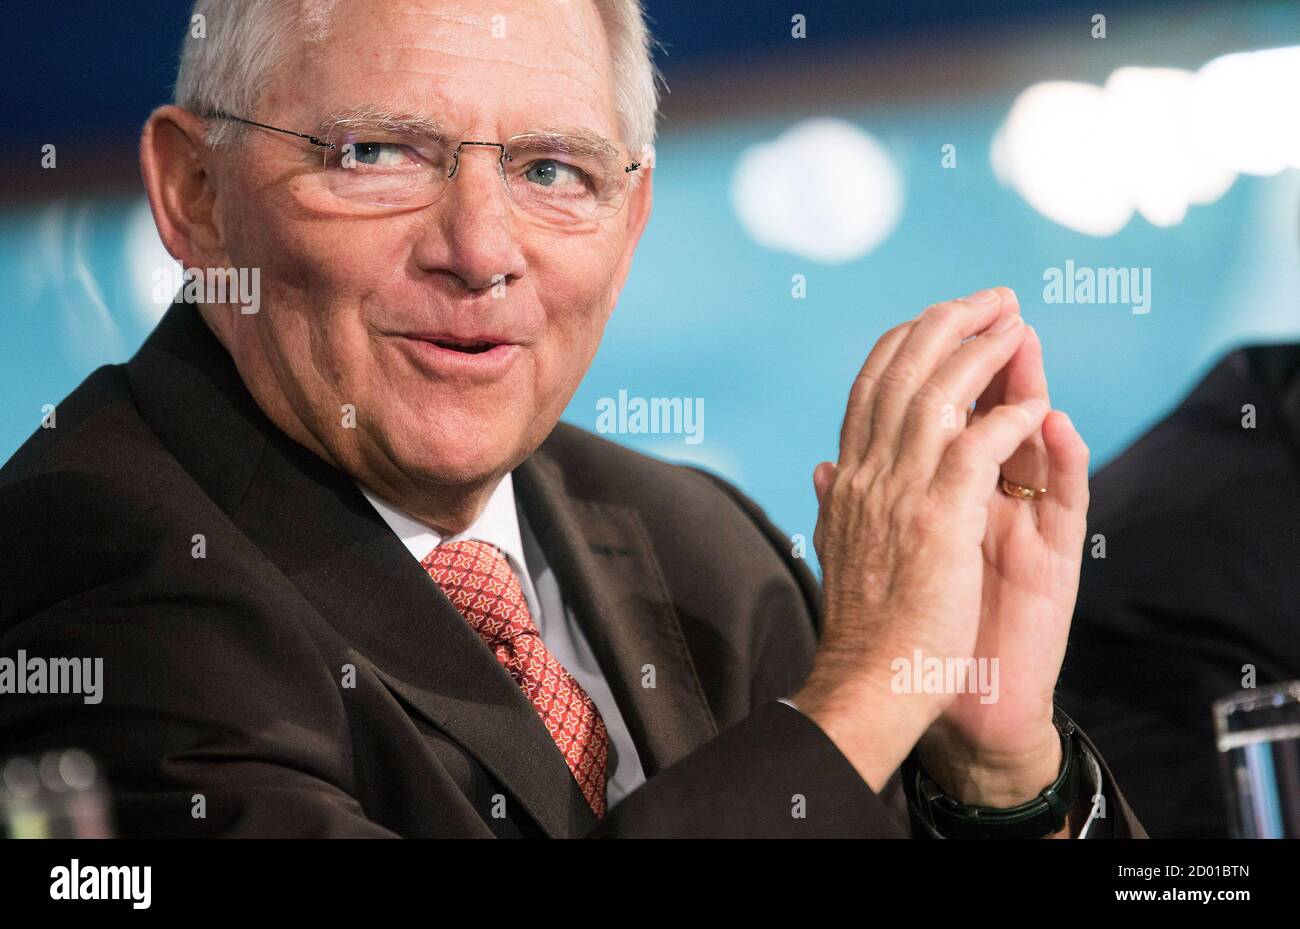 Germany's Minister of Finance Wolfgang Schauble speaks during a discussion on 'A Reform Agenda for Europe's Leaders' during the World Bank/IMF annual meetings in Washington October 9, 2014. Schaeuble said on Thursday more government spending was a wrong cure for the euro zone's weak growth and dismissed the prospect of recession for Europe's biggest economy.     REUTERS/Joshua Roberts    (UNITED STATES - Tags: POLITICS BUSINESS) Stock Photo